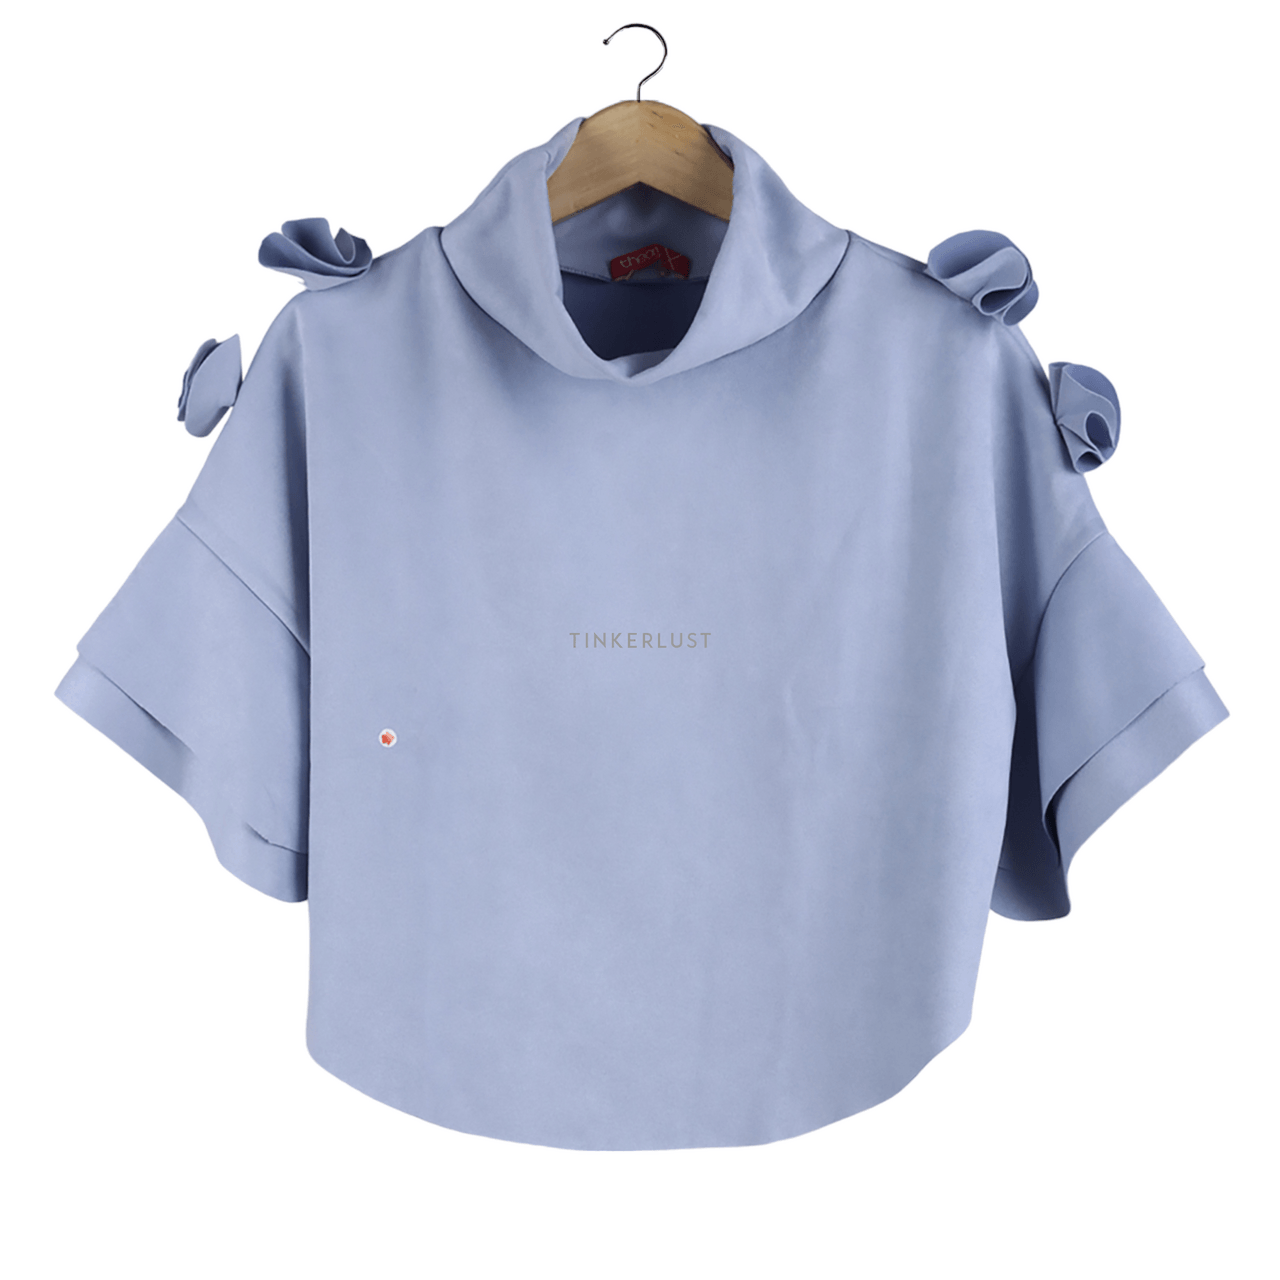 TheoryX Light Blue Suede Blouse